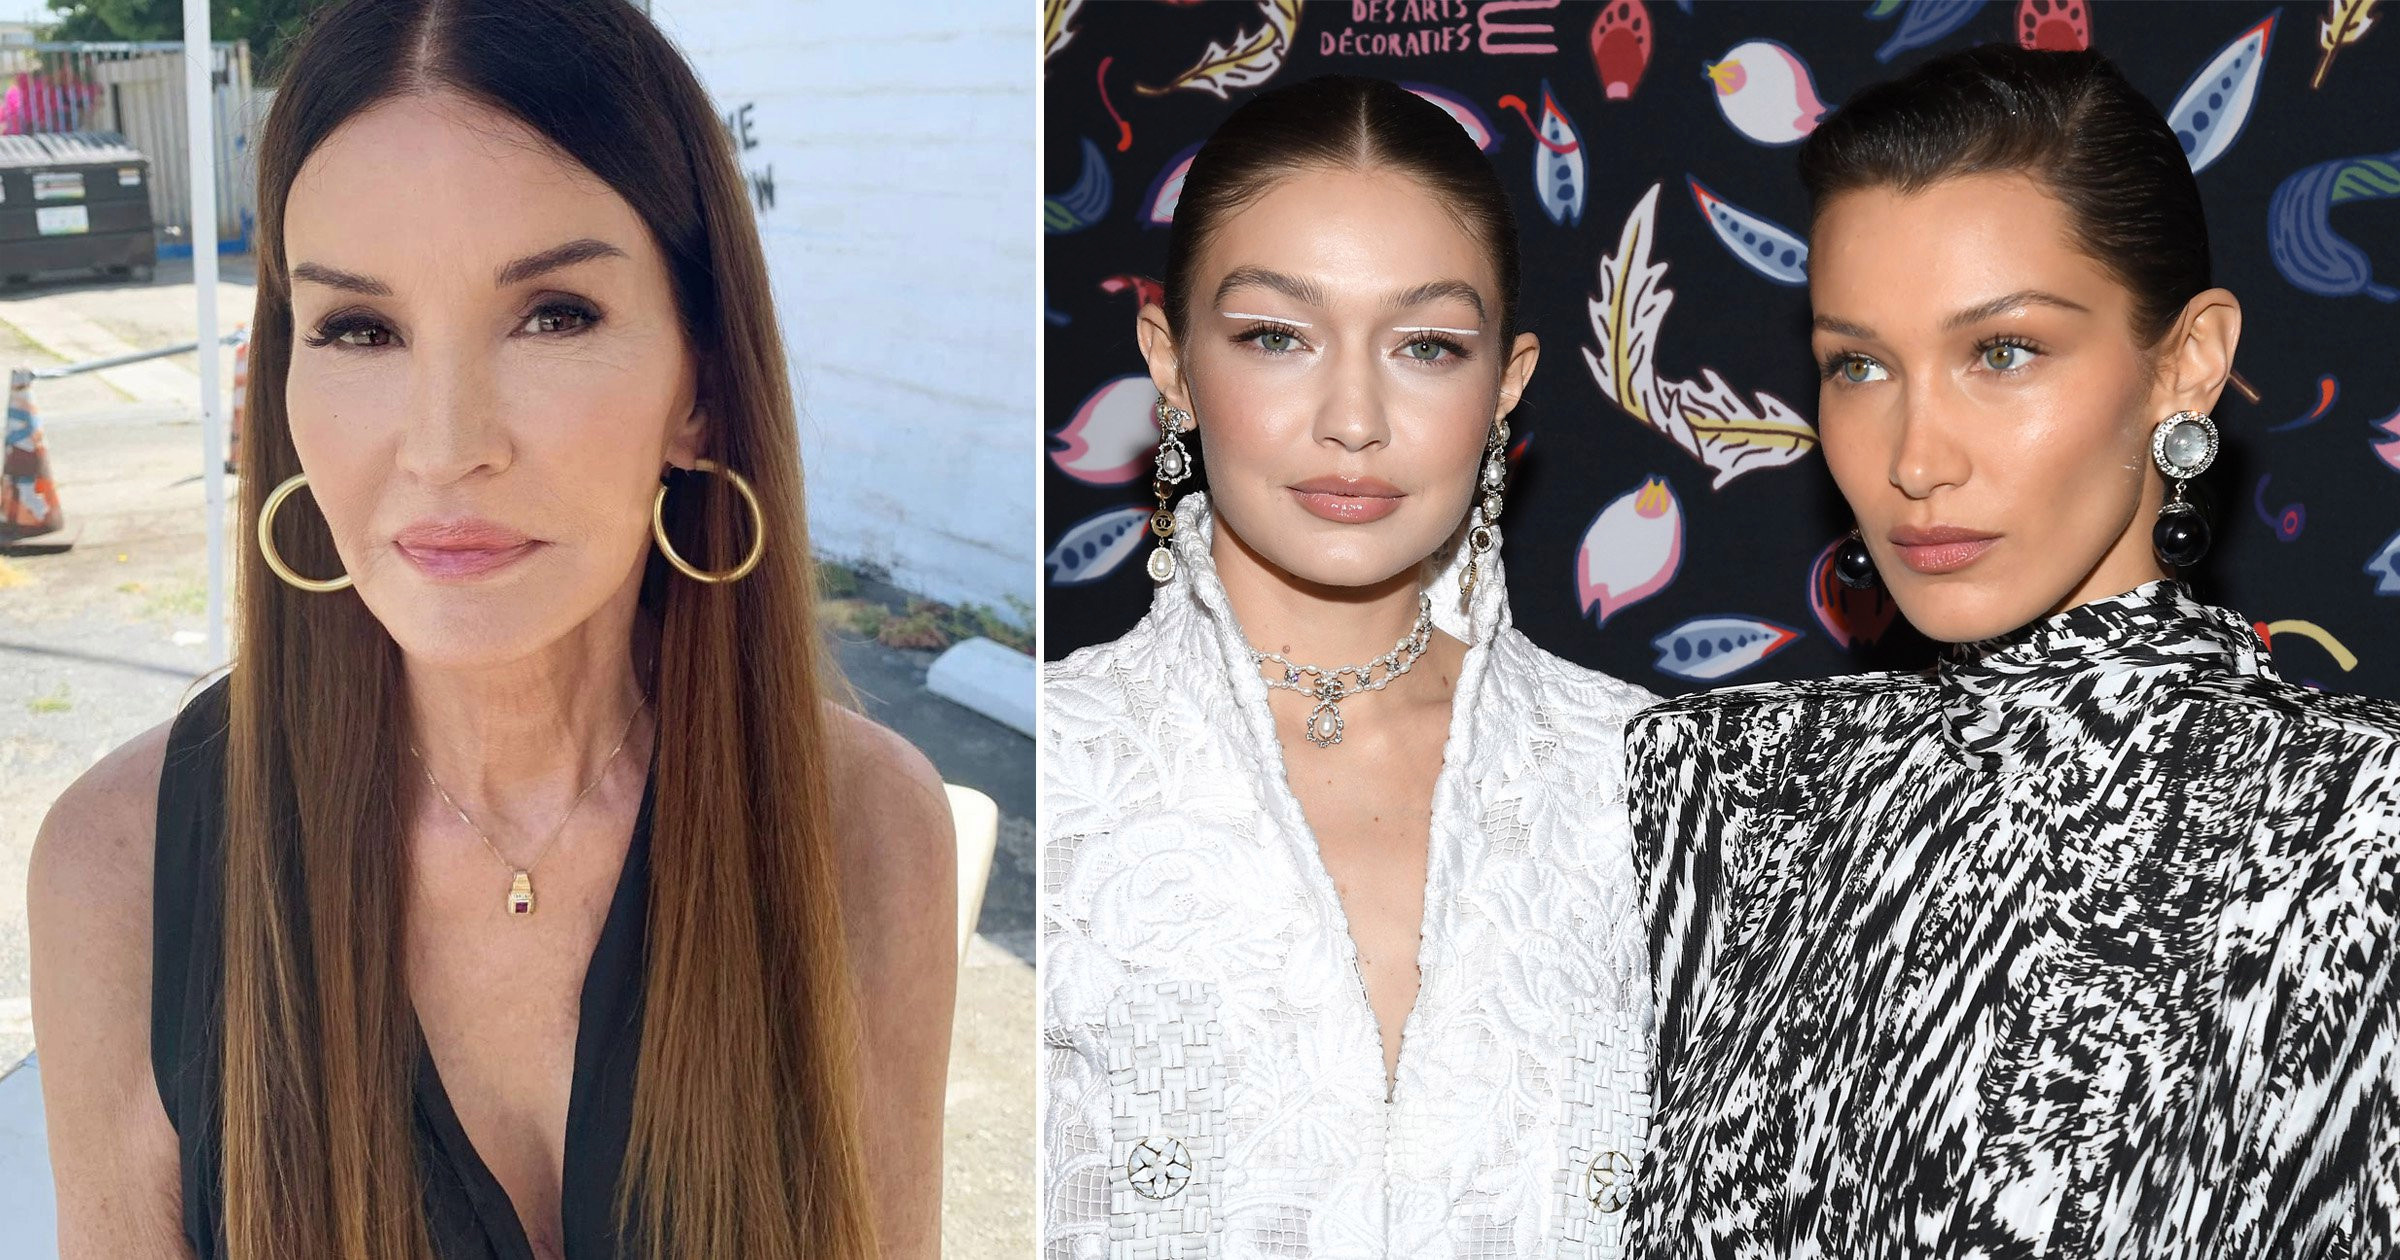 Janice Dickinson slams catwalk stars like Gigi and Bella Hadid: ‘They’re pretty but they’re not supermodels’